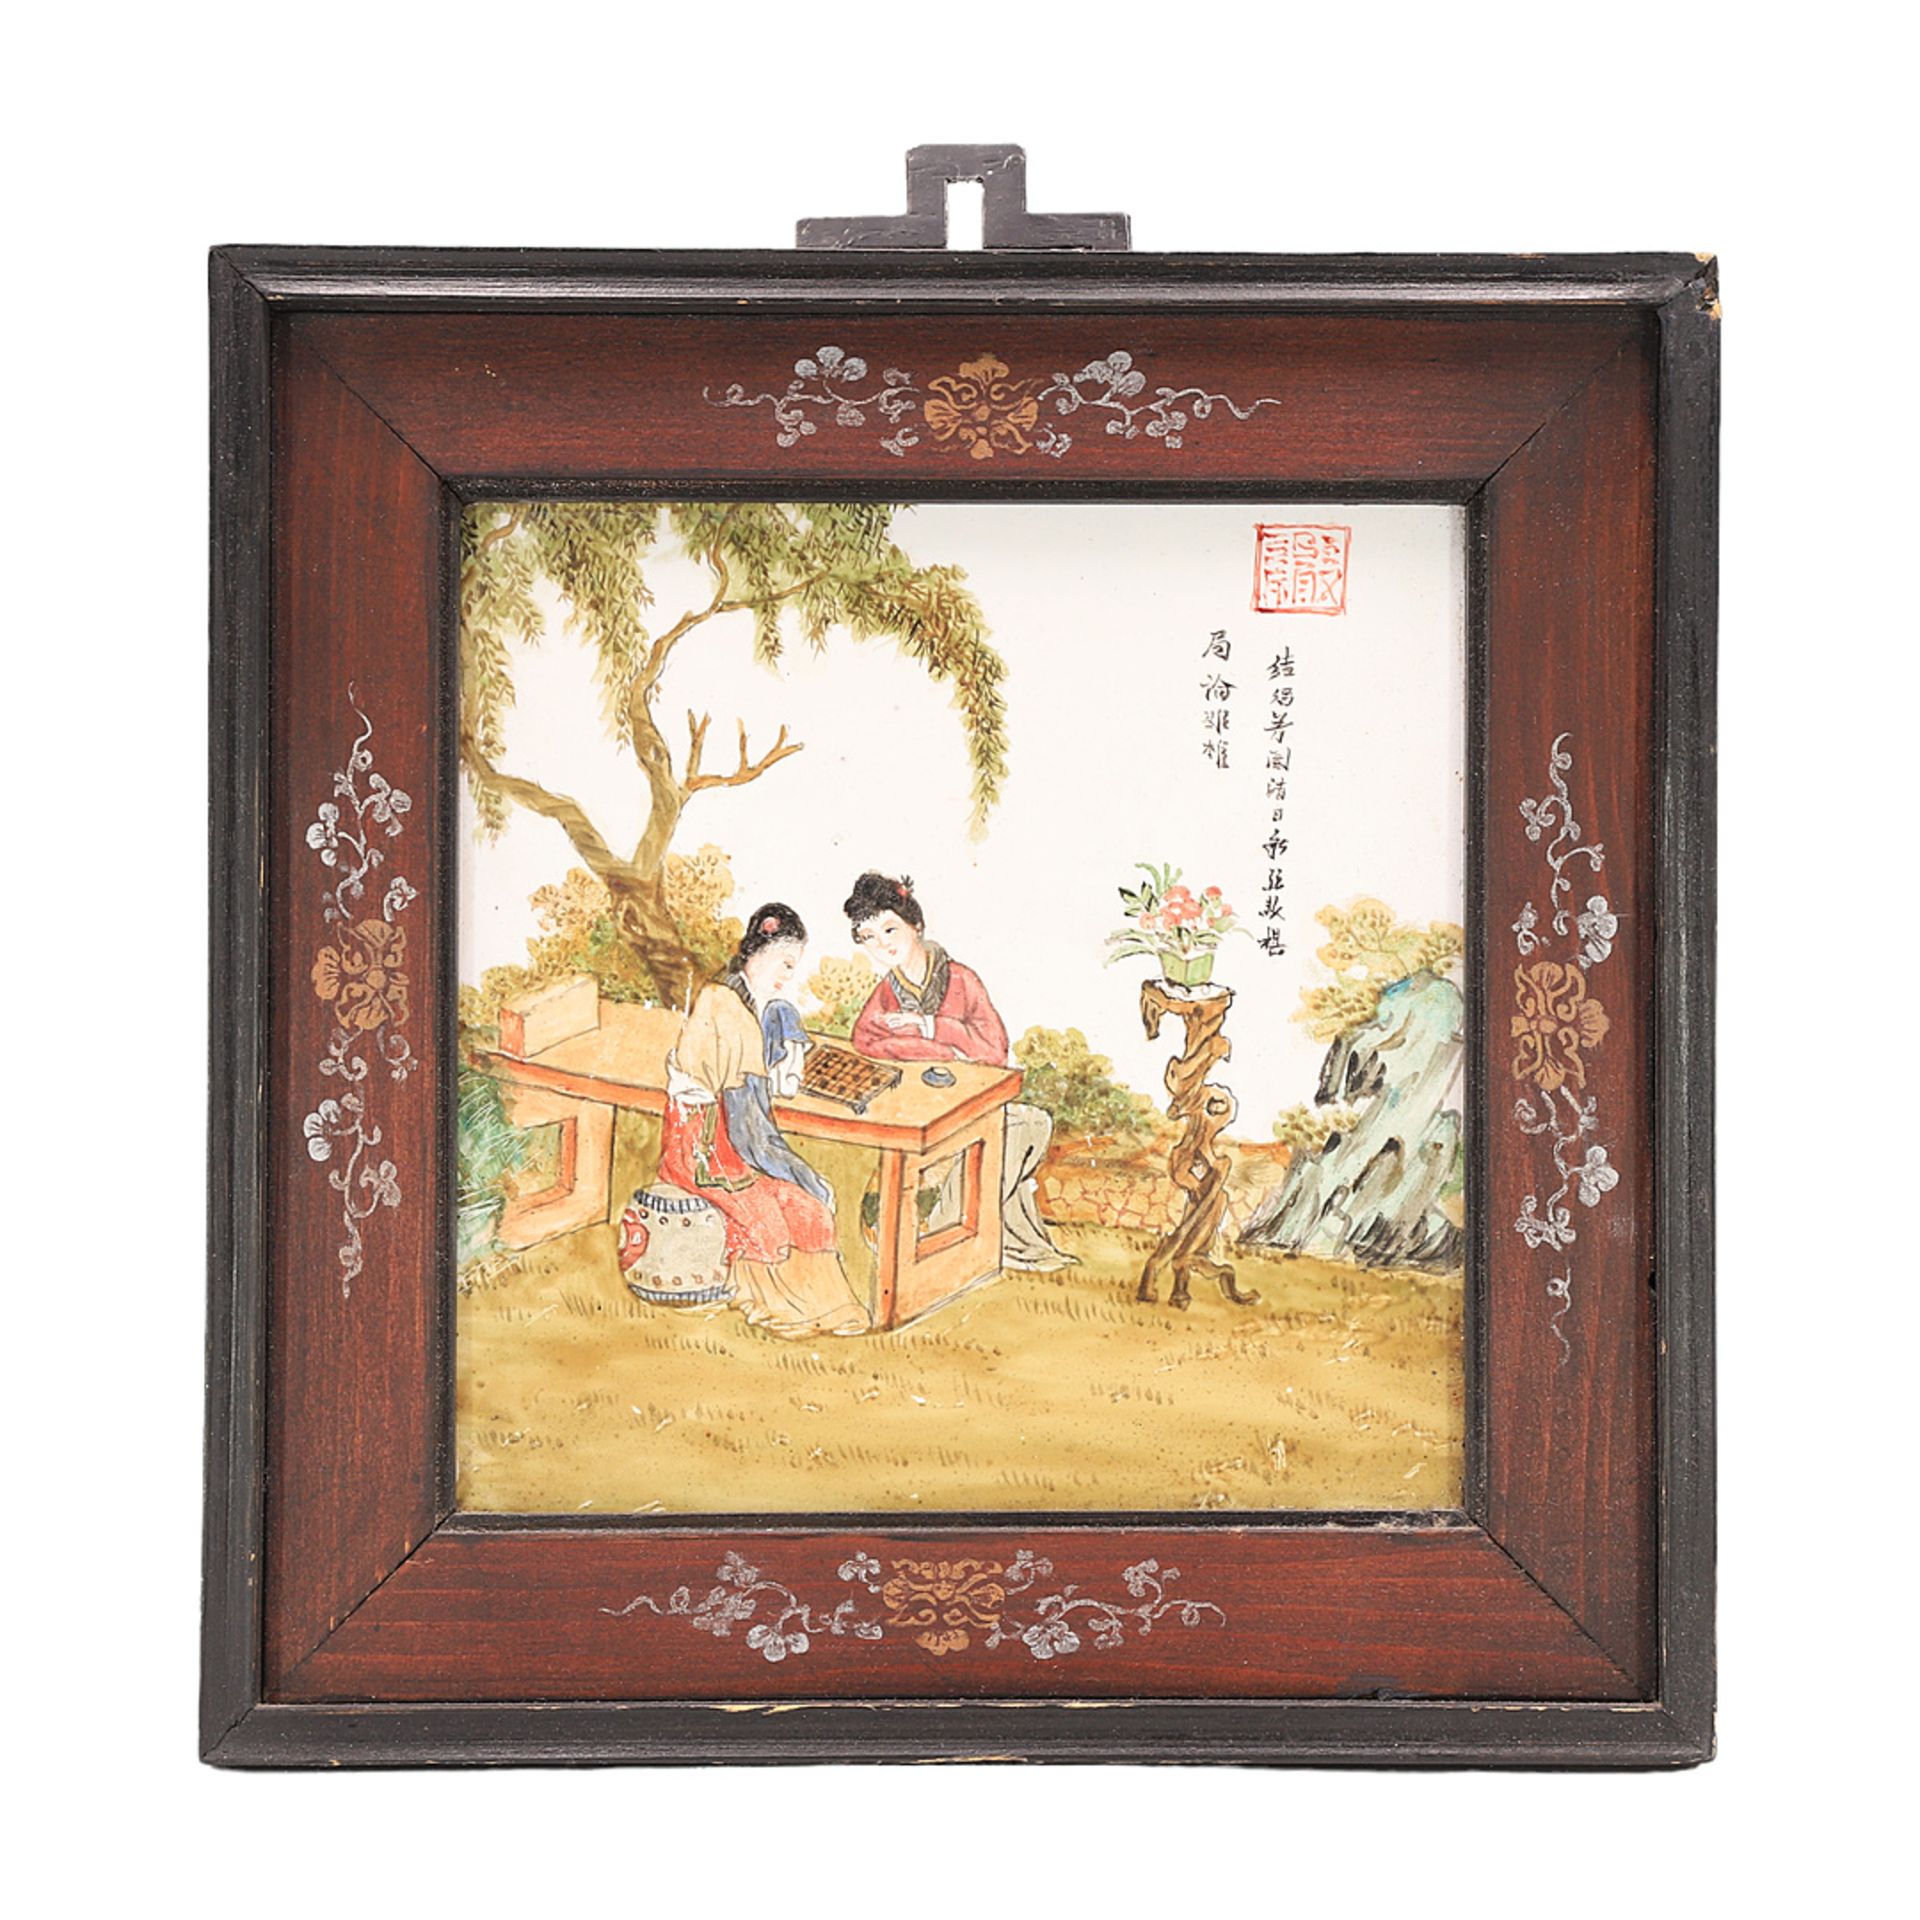 Two women playing a board game, China, 20th century